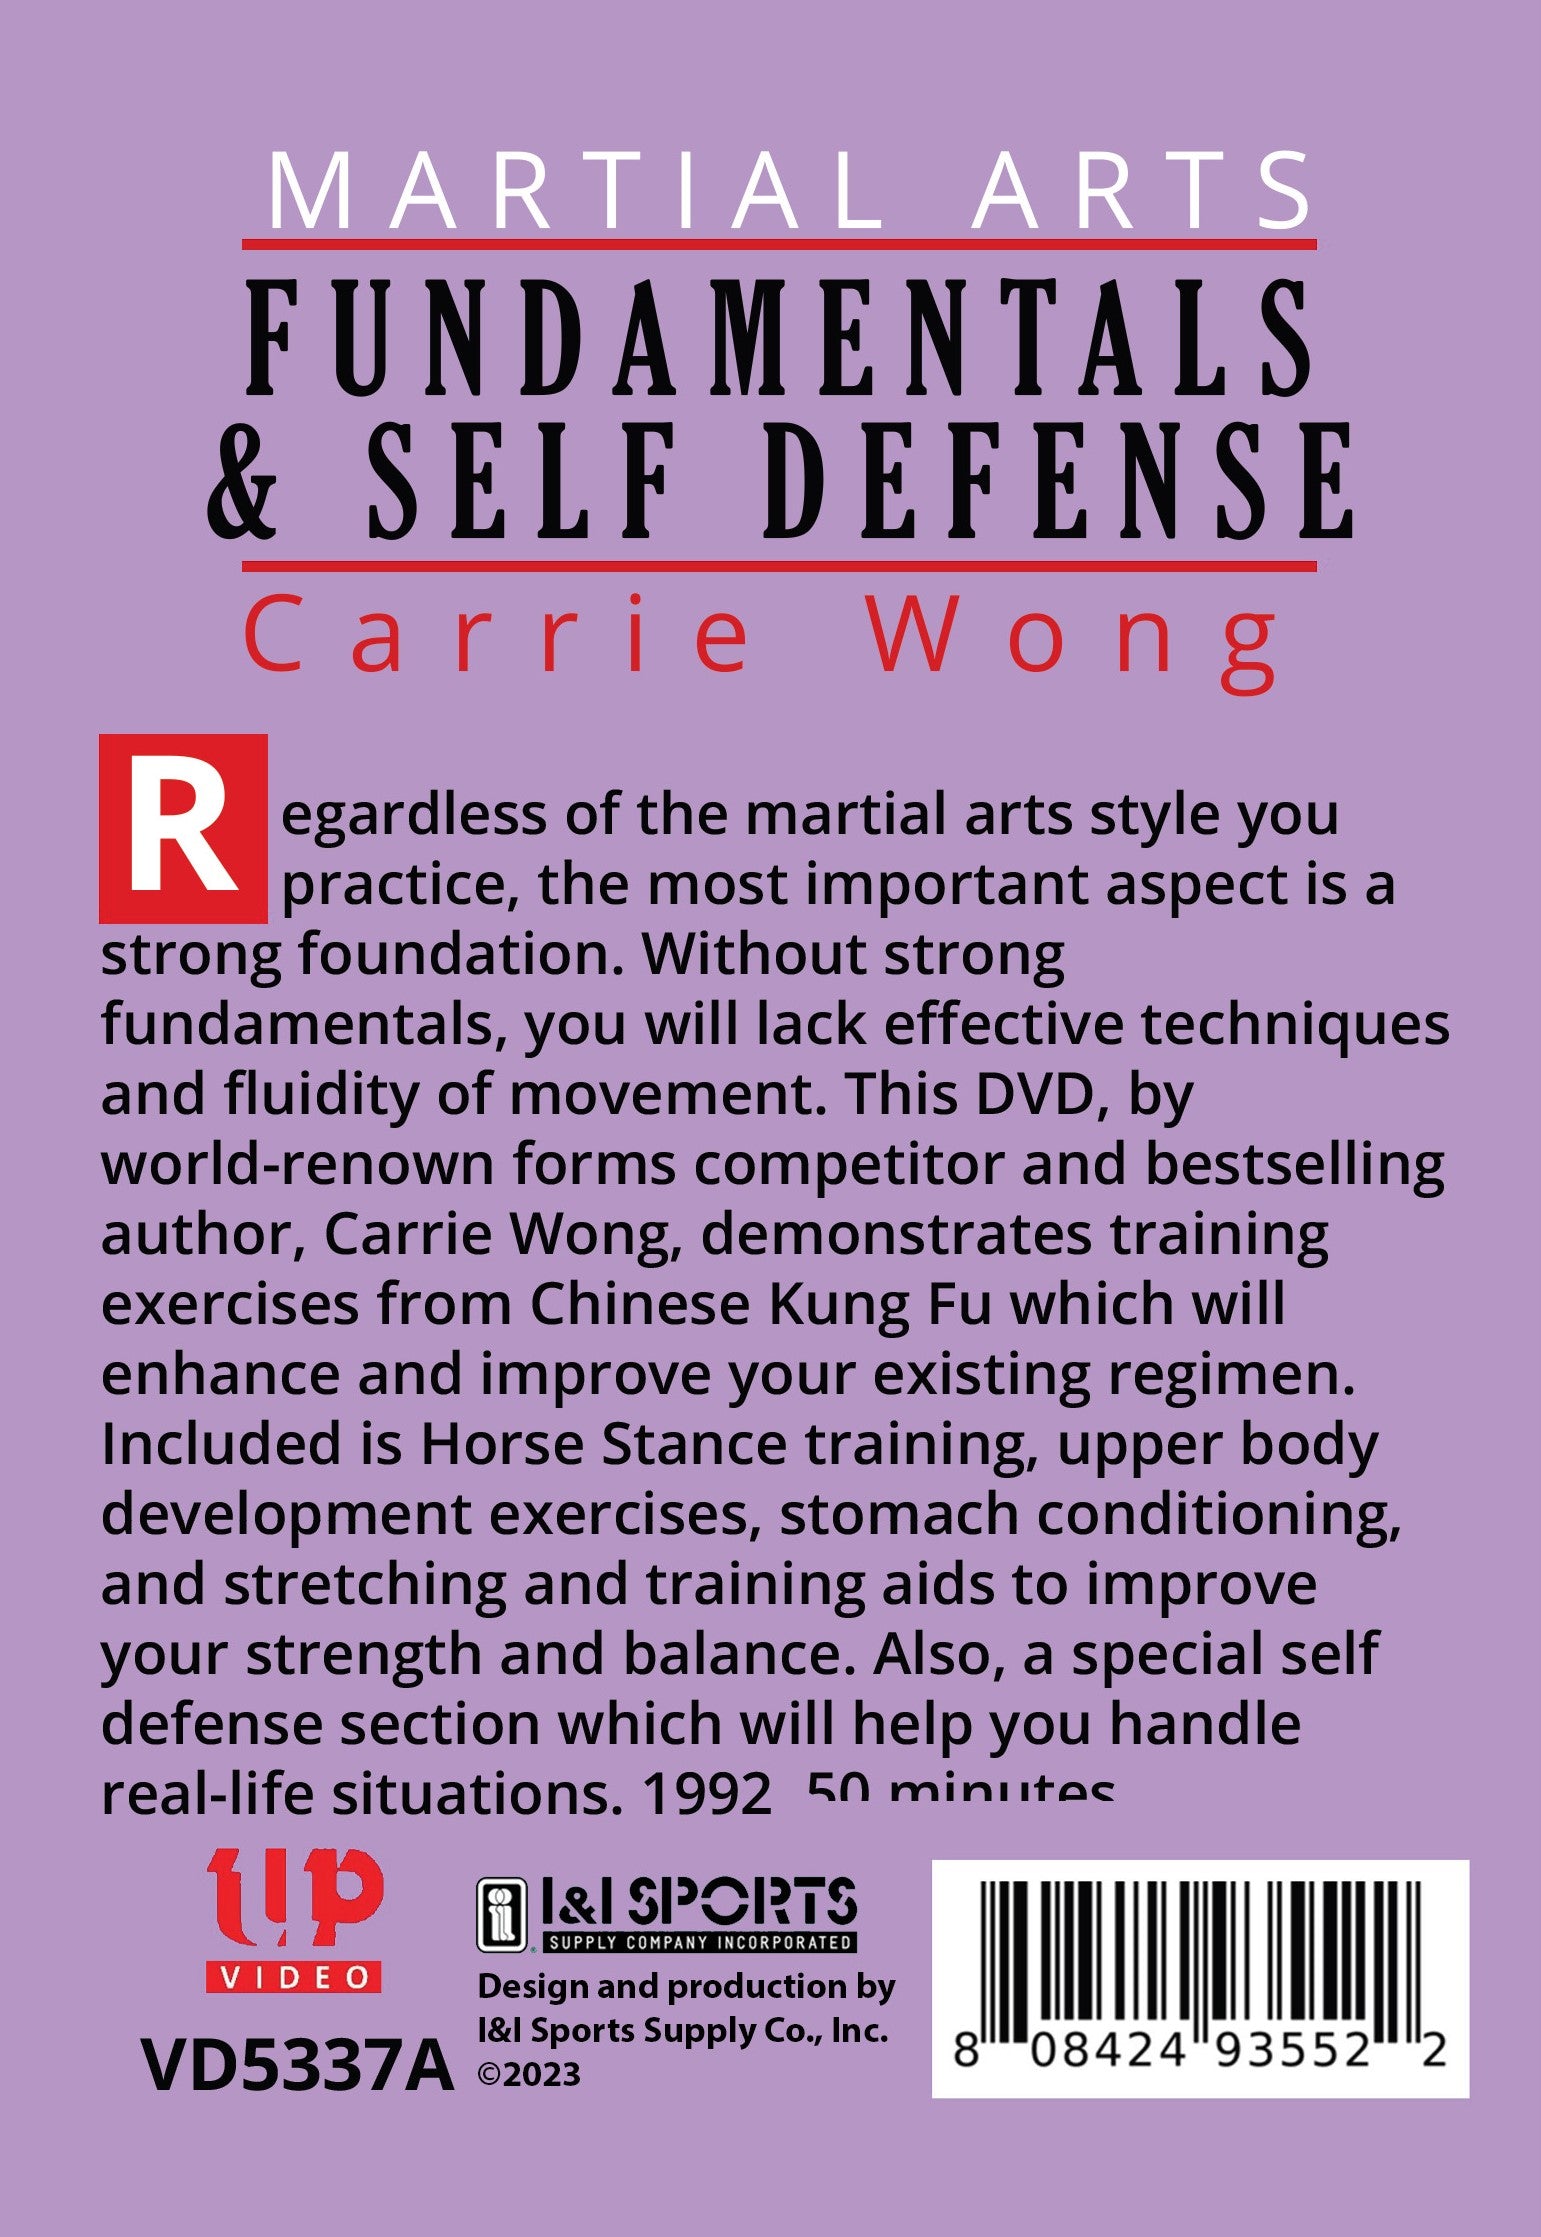 Martial Arts Fundamentals & Self Defense, Kung Fu Fighting DVD Carrie Wong